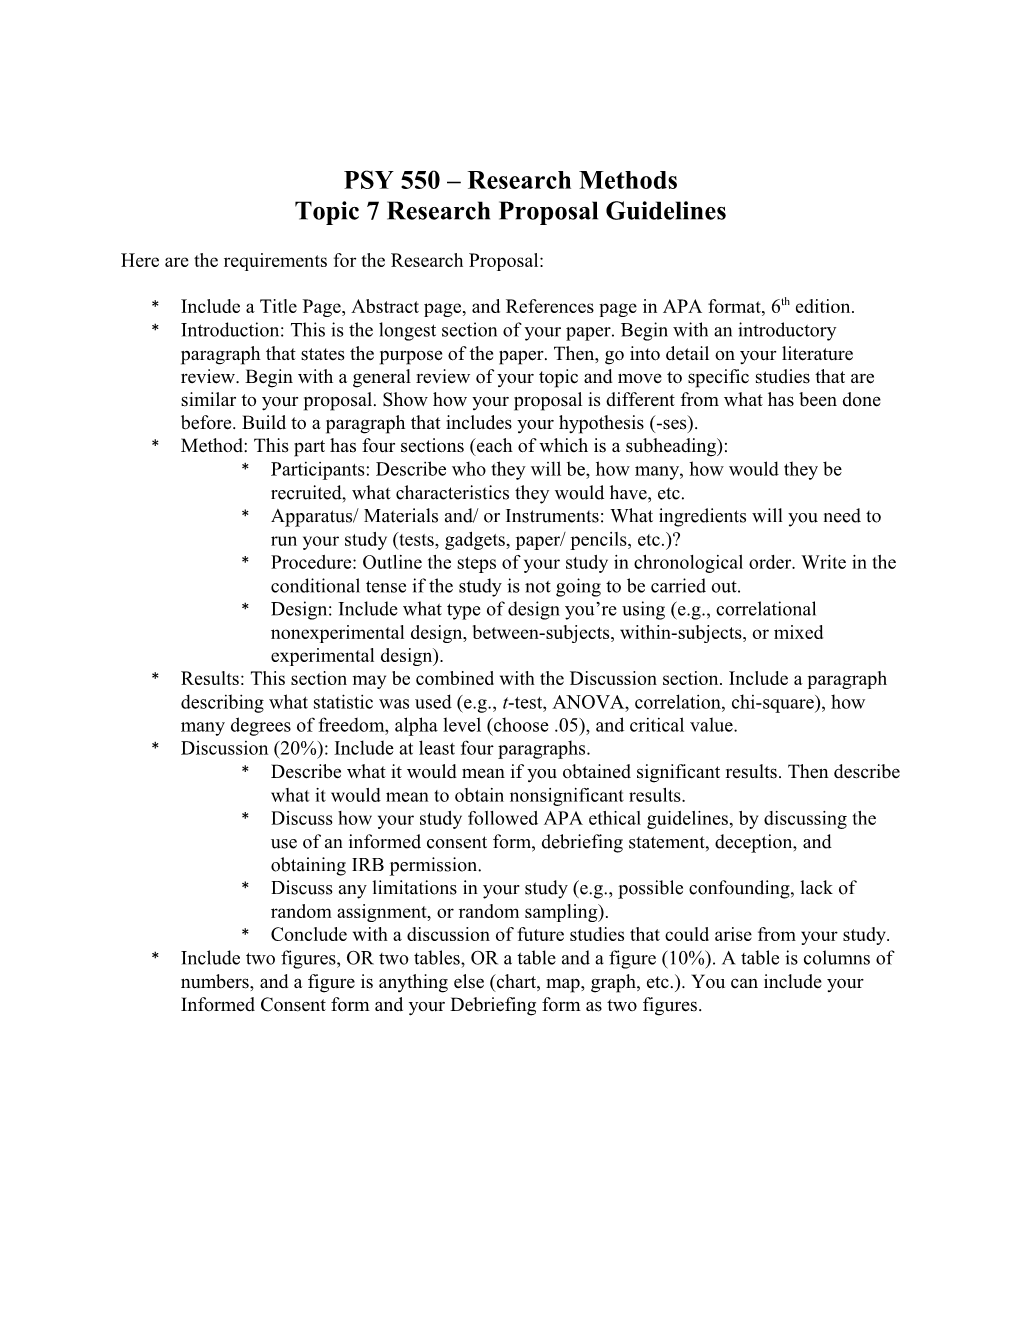 Topic 7 Research Proposal Guidelines